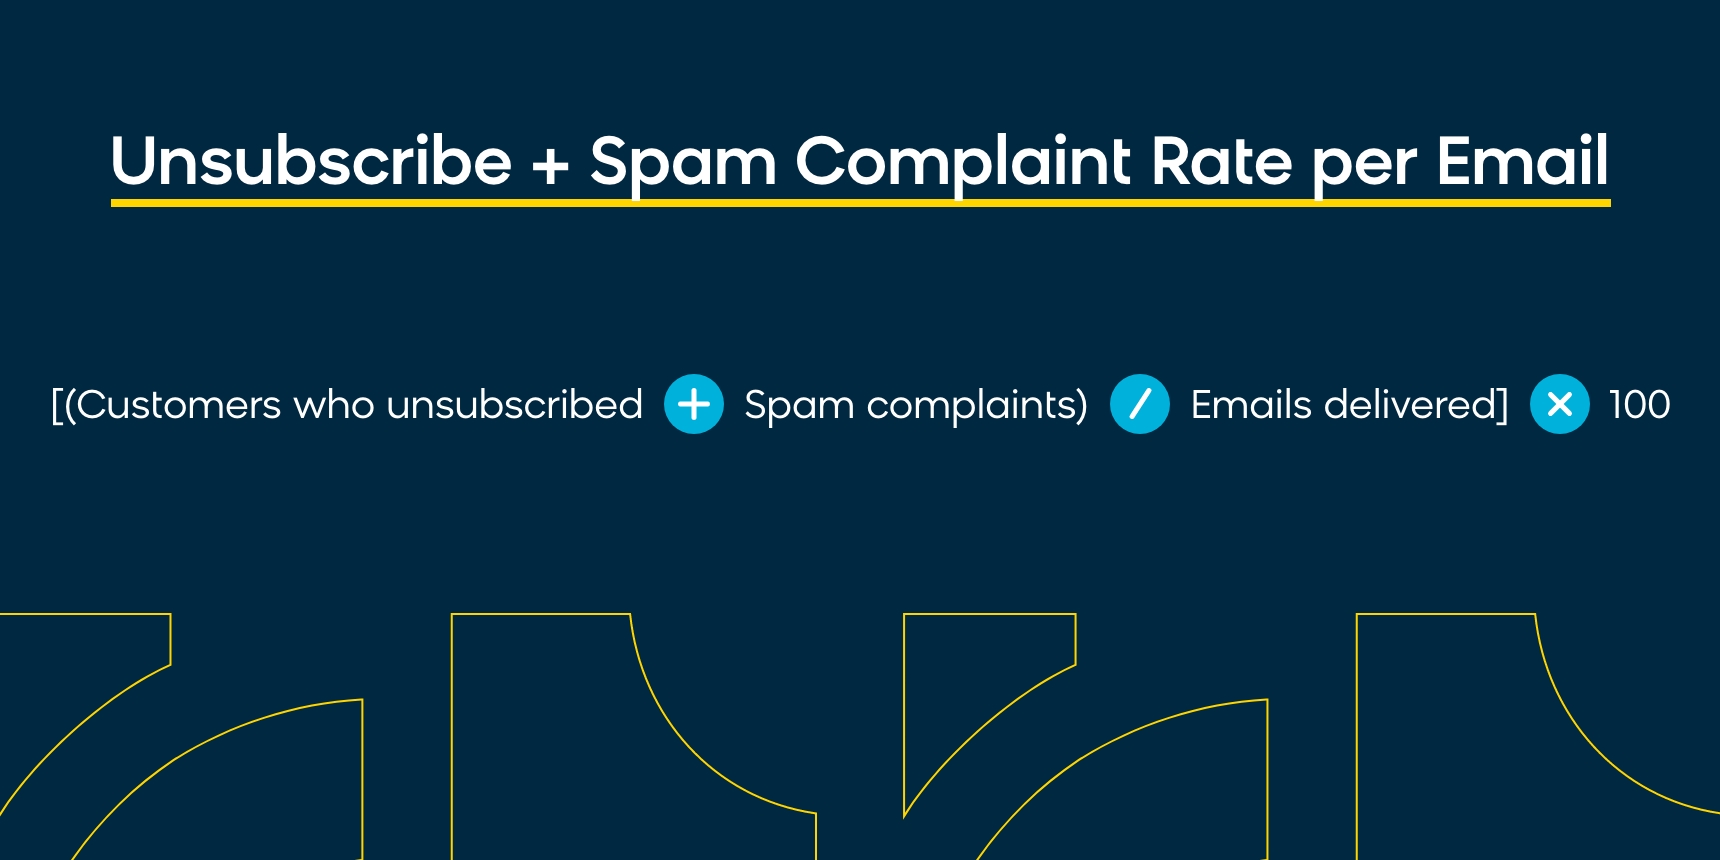 Formula to calculate unsubscribe and spam complaint rate per email